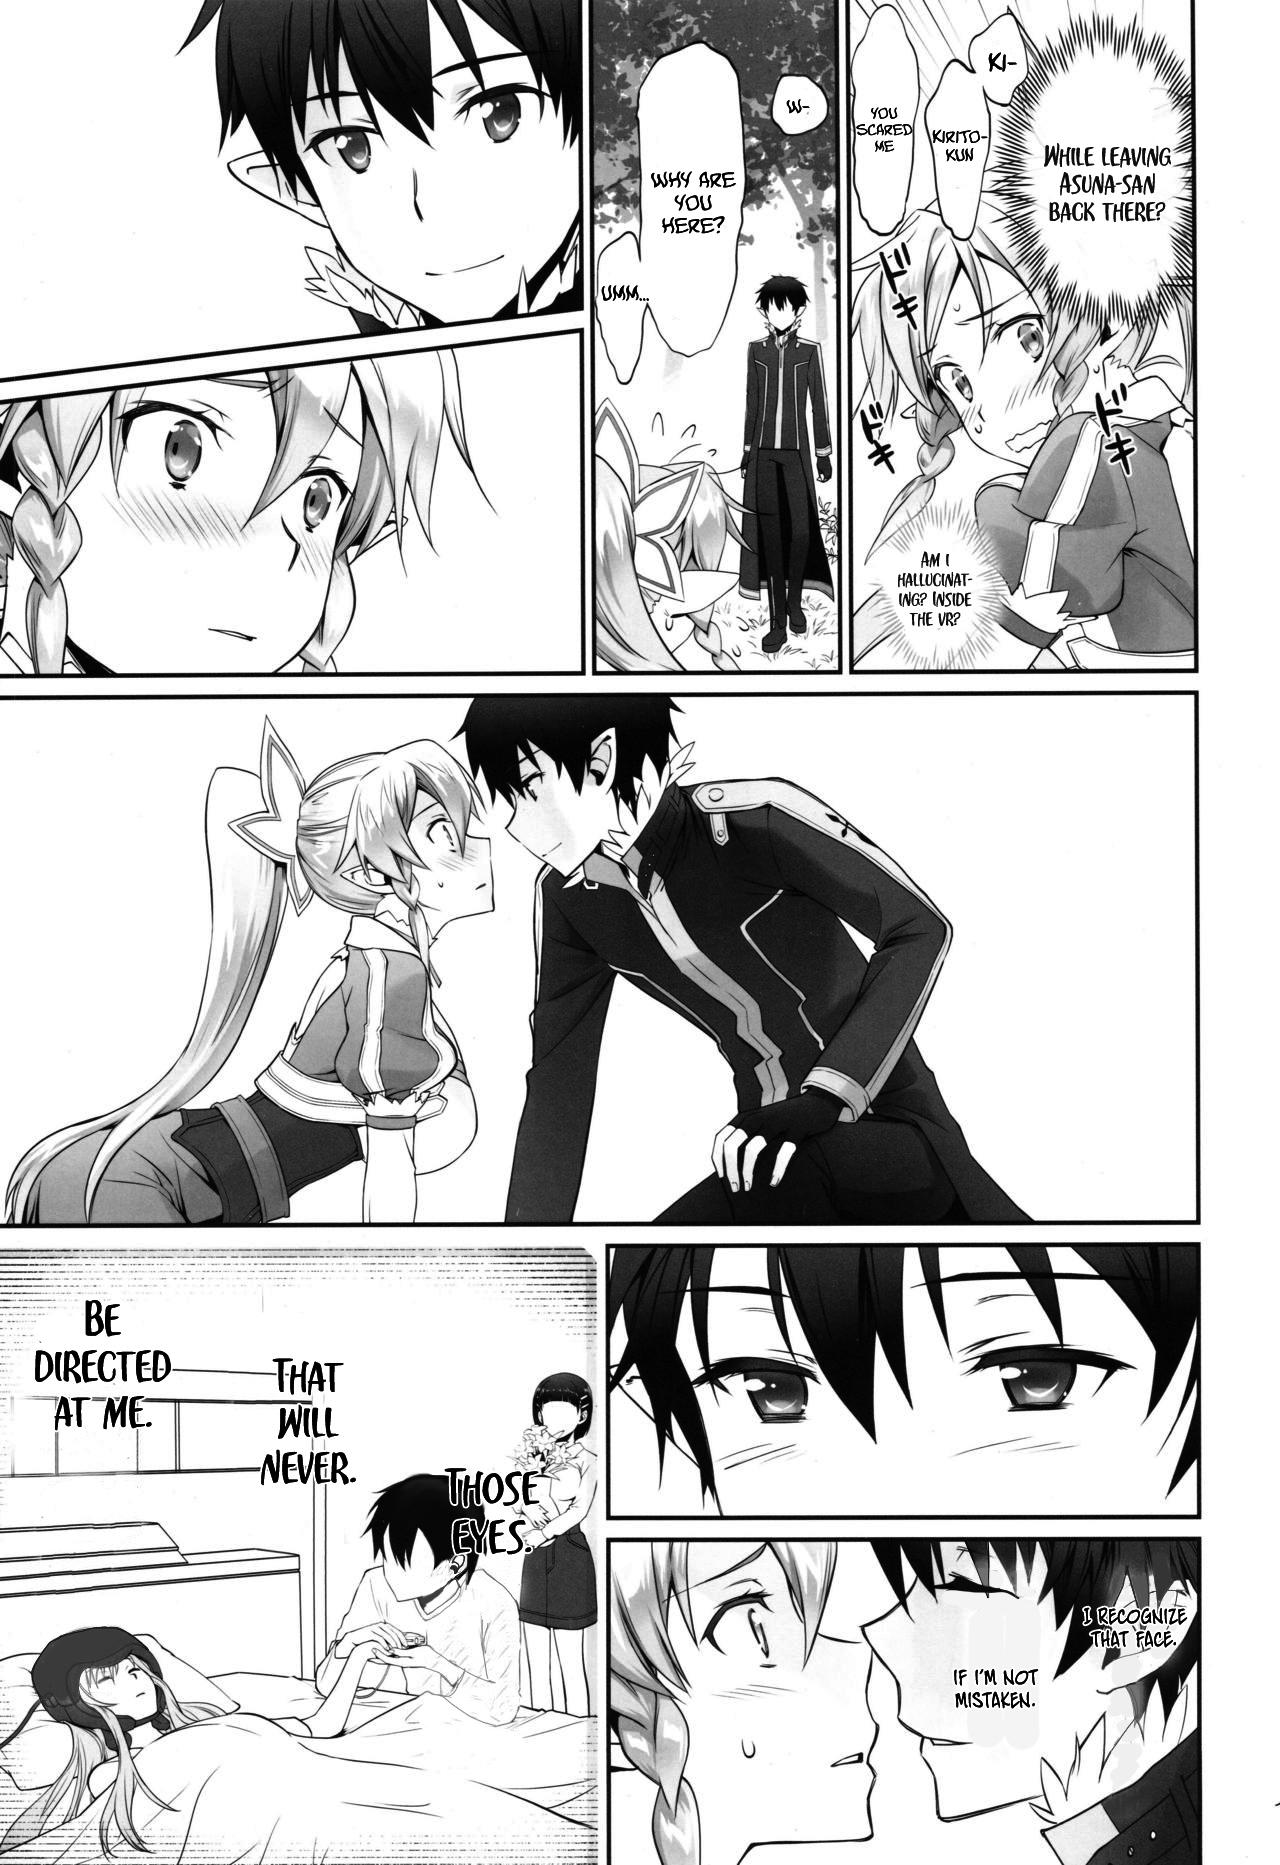 Thailand irreversible reaction - Sword art online Con - Page 12